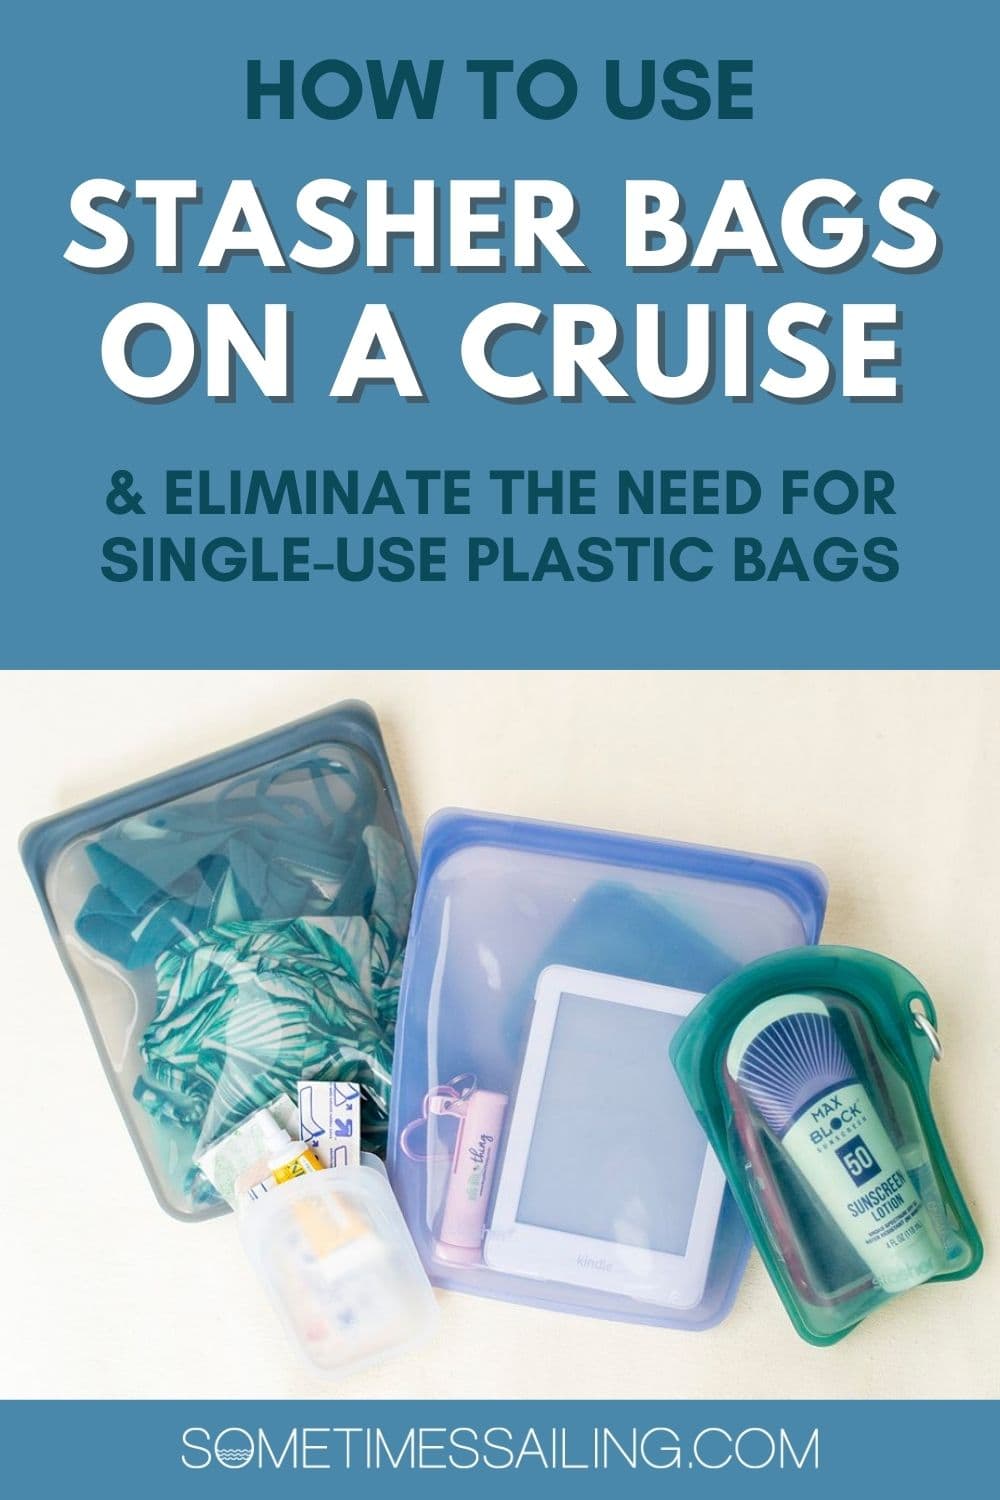 How to use Stasher Bags on a Cruise with a picture of the bags underneath the words.